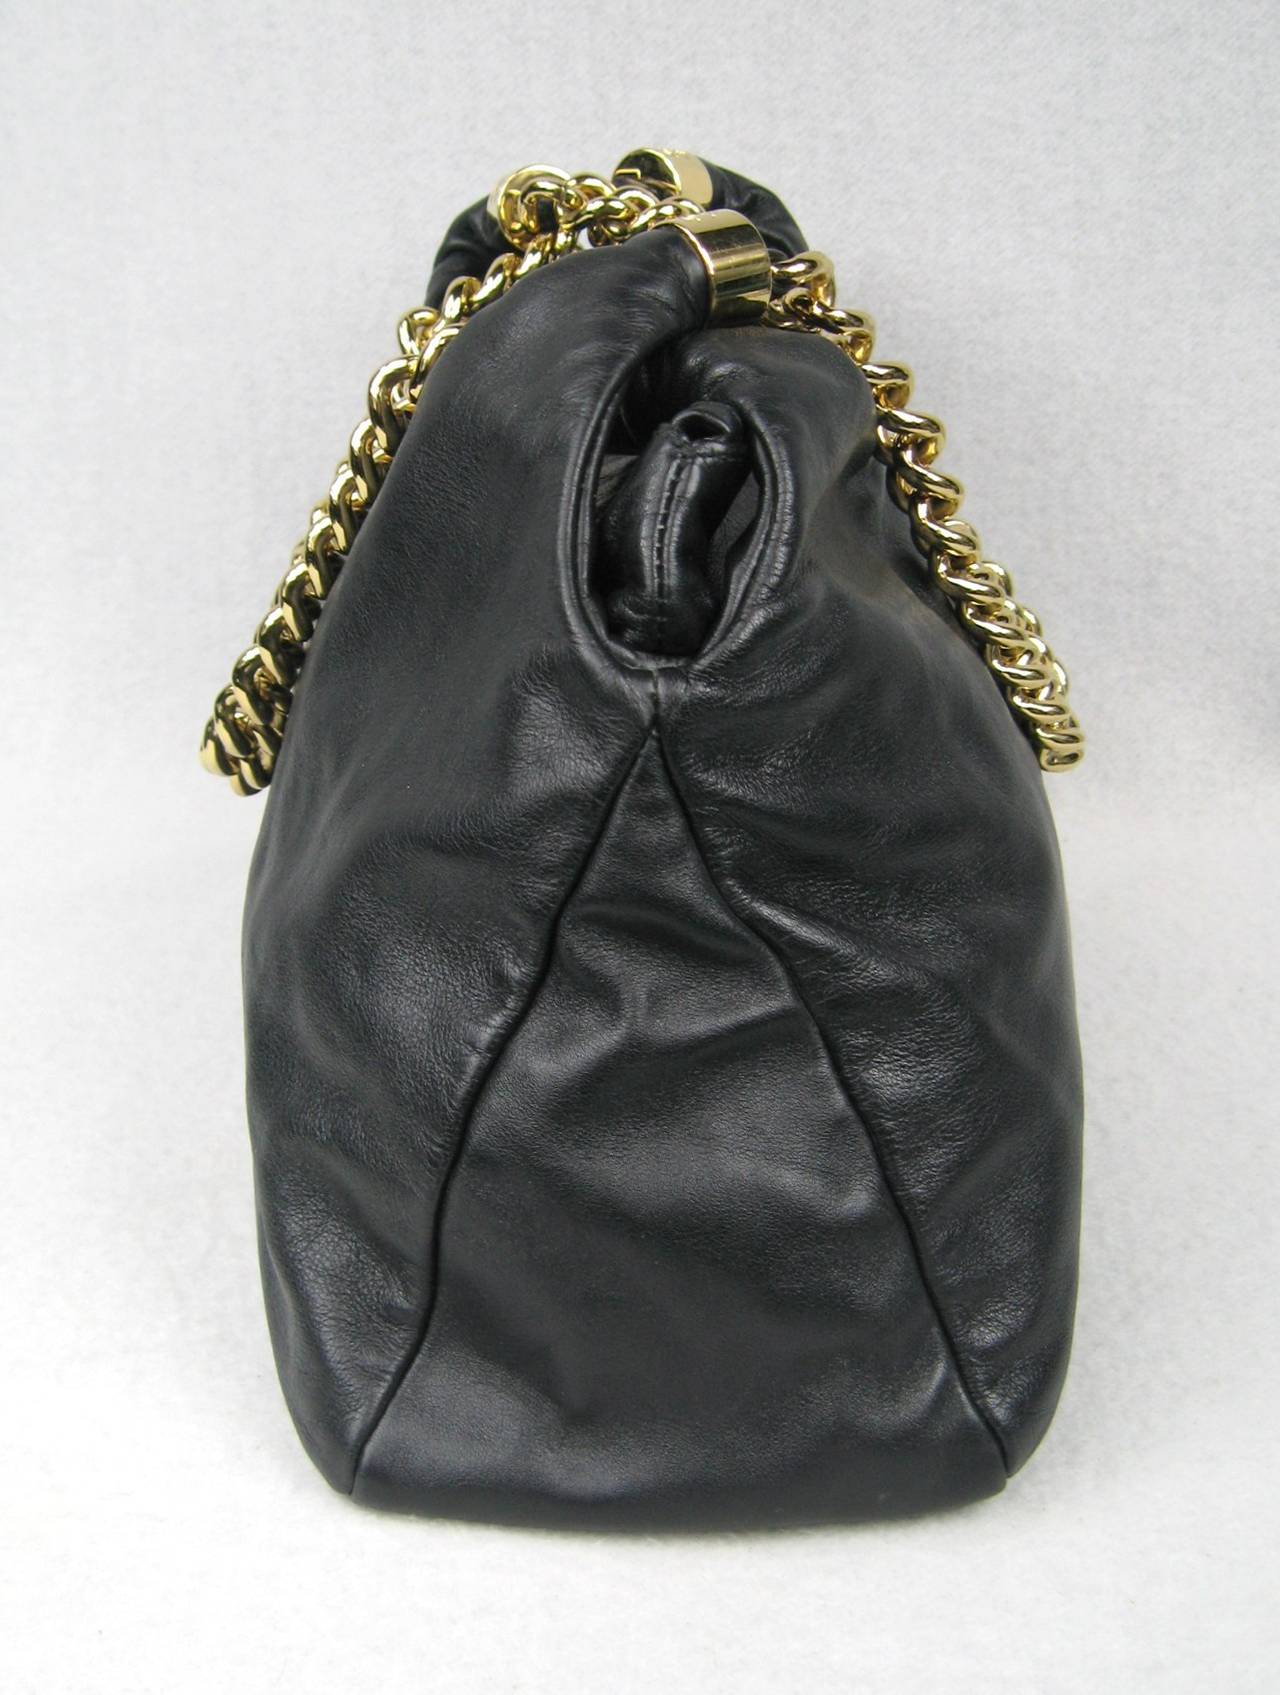 Chanel Black Lambskin Gold Chain Handbag  In Good Condition For Sale In Wallkill, NY